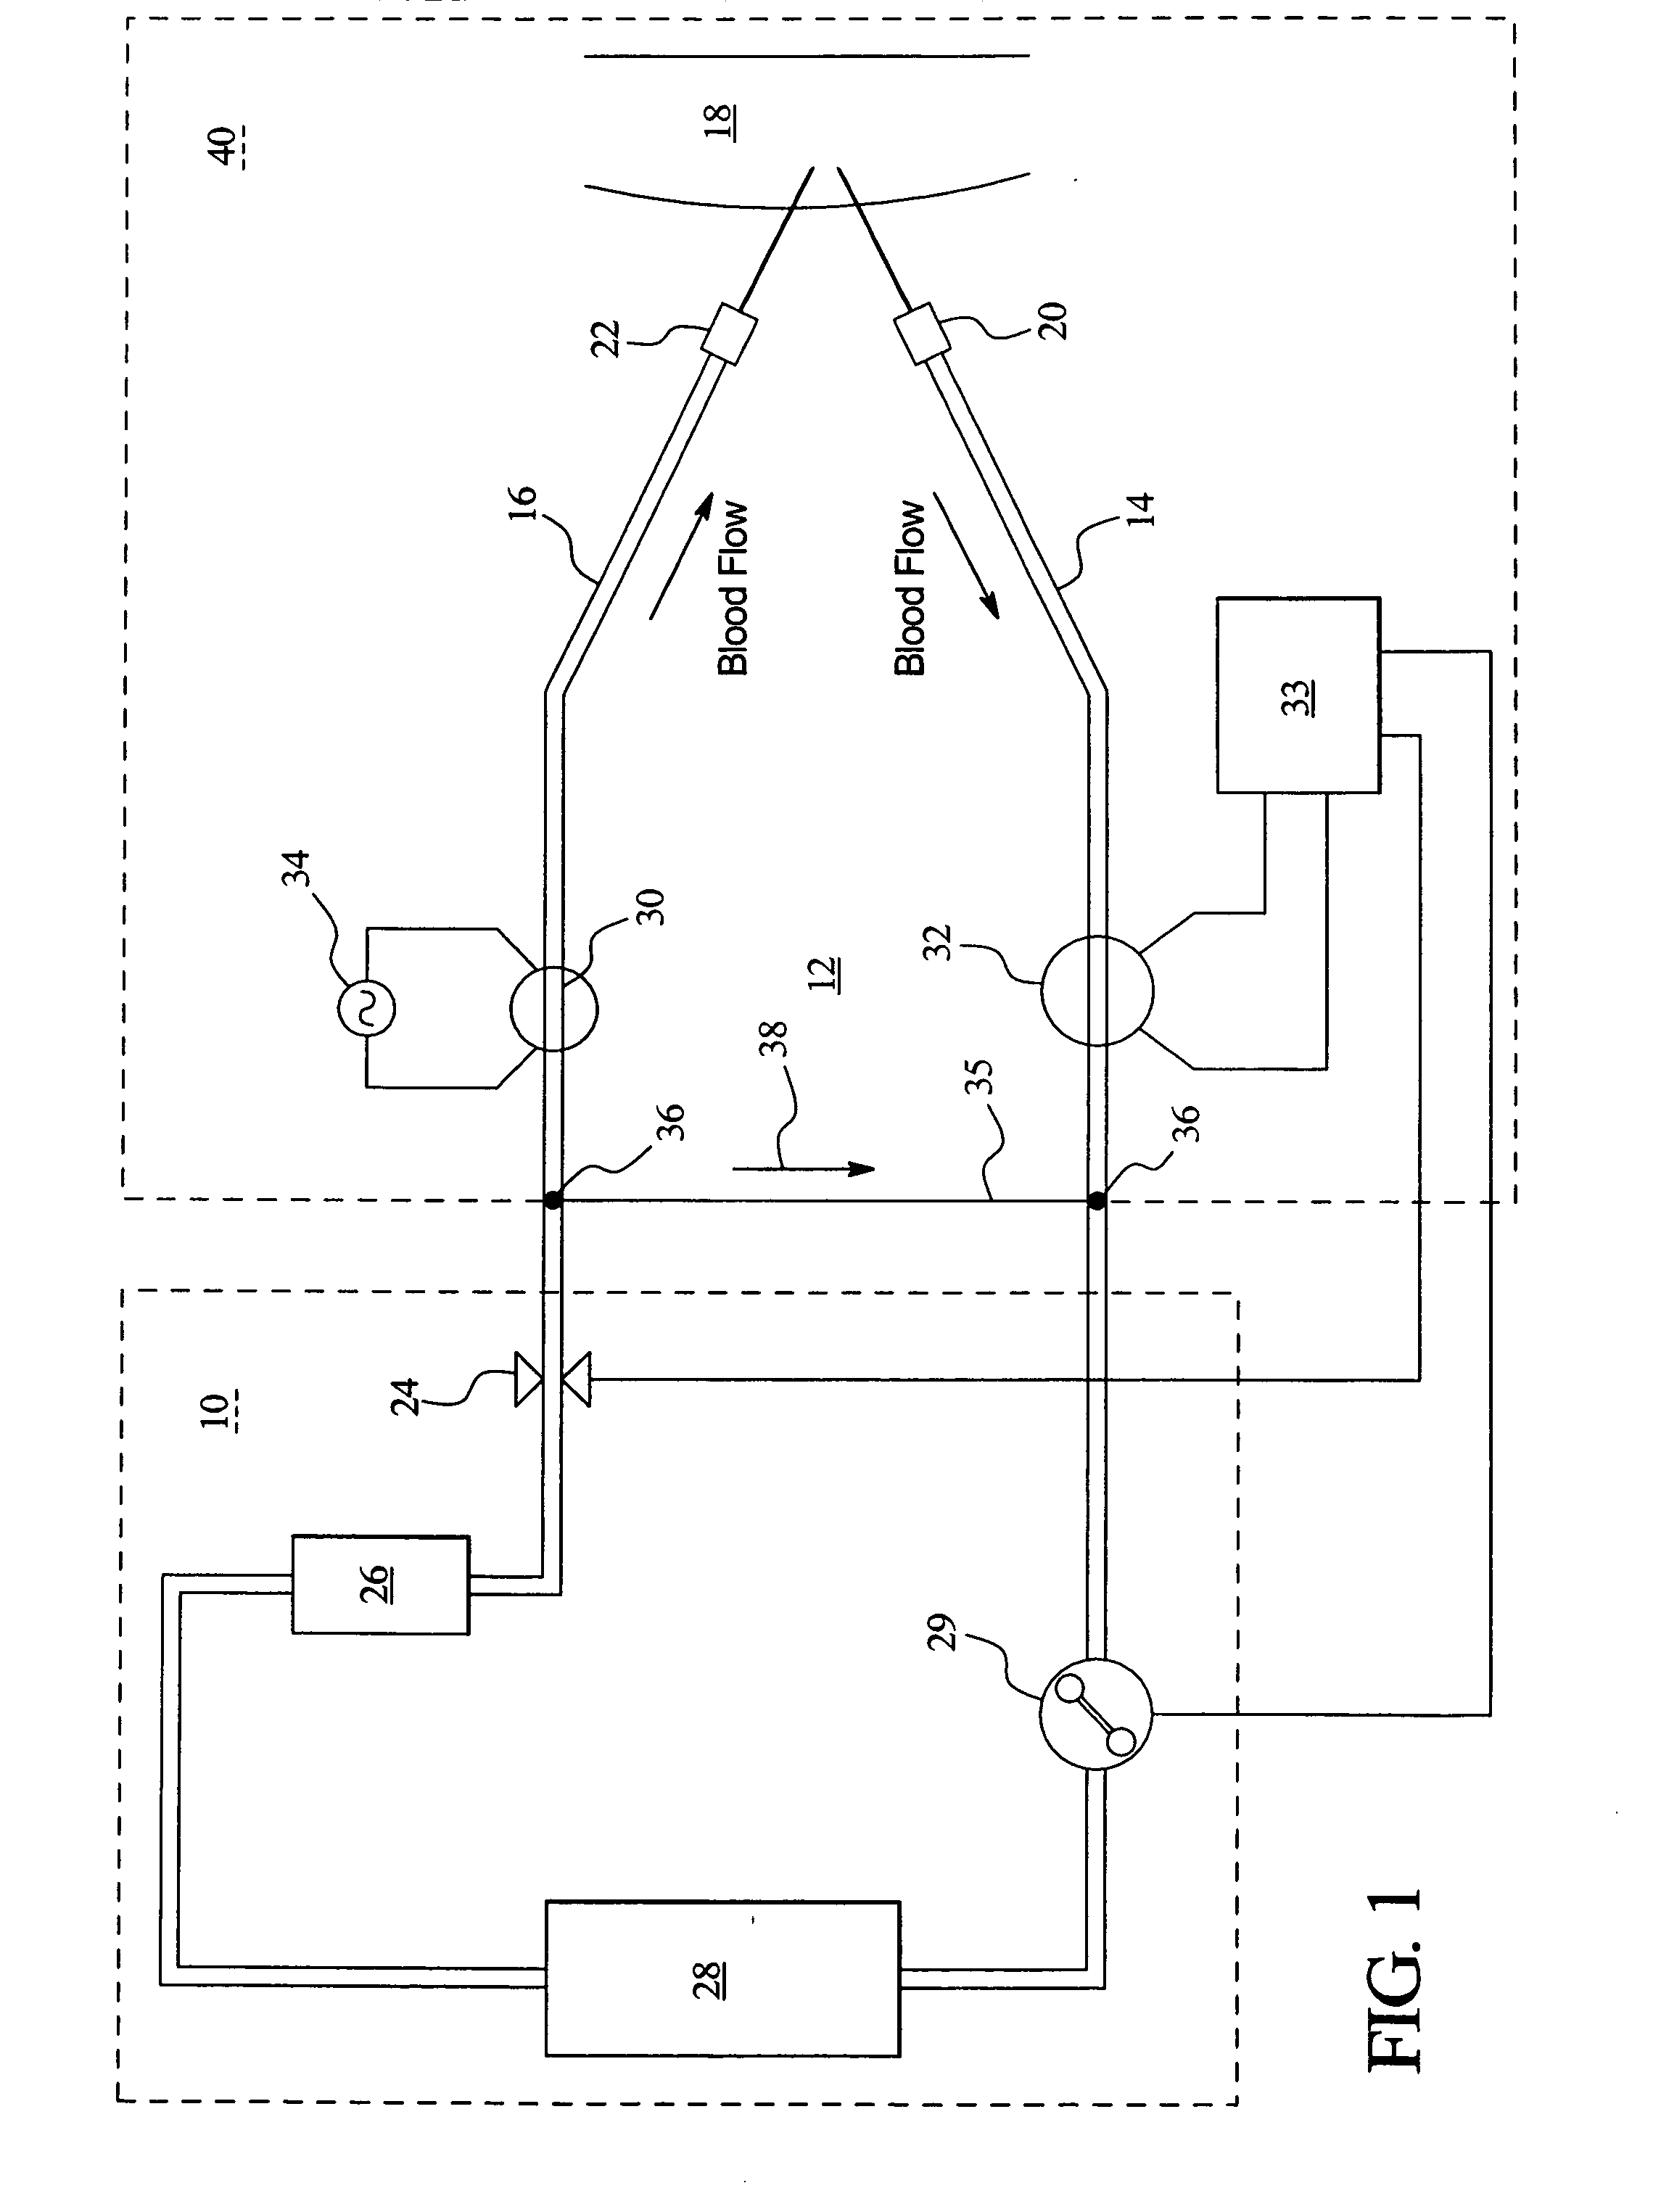 Access disconnection systems and methods